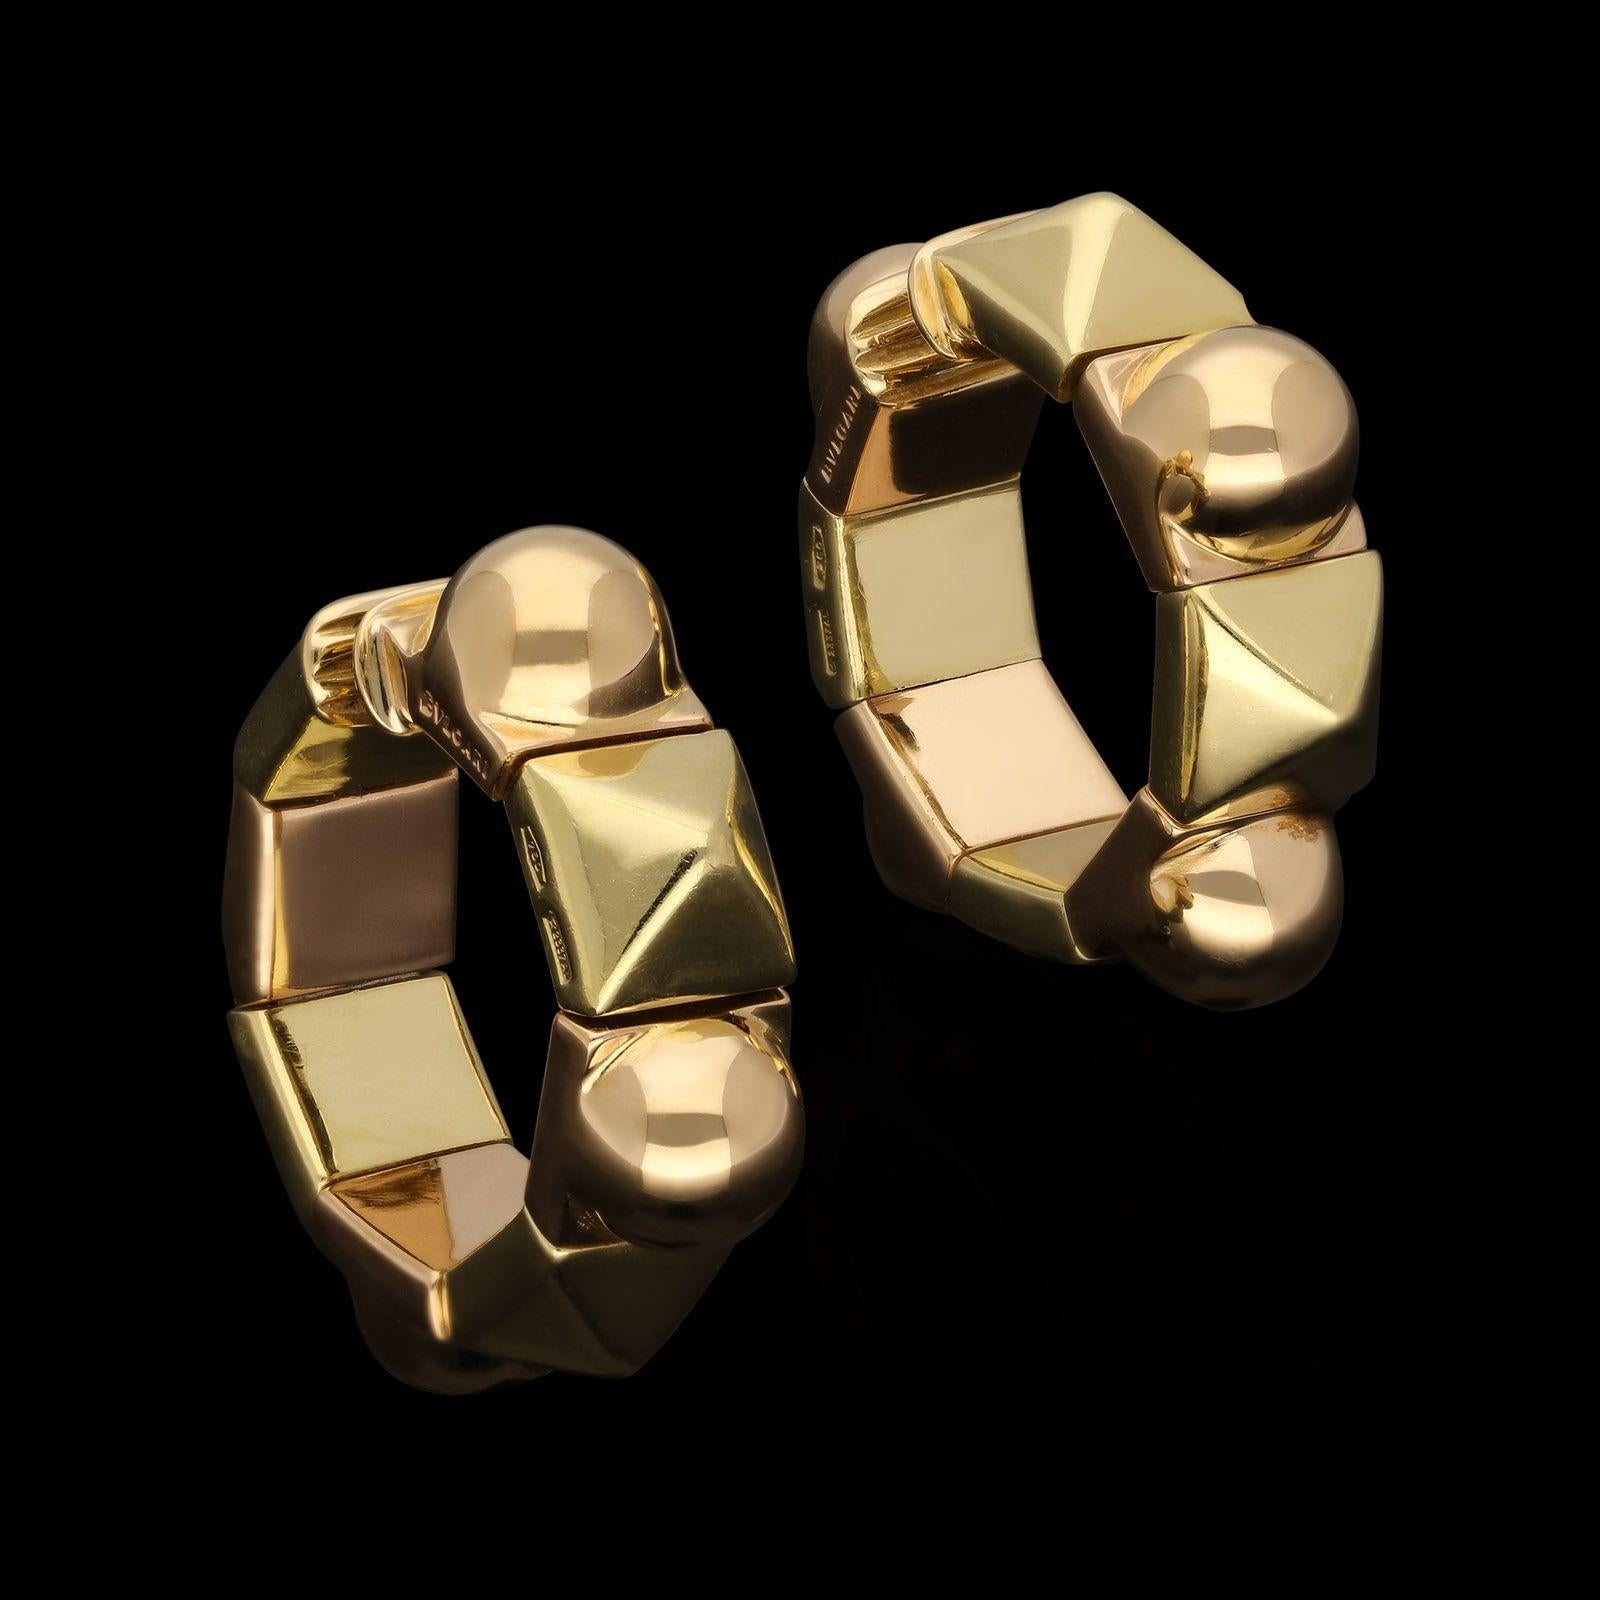 A stylish pair of vintage two-tone gold earrings by Bulgari c.1980s, each hoop approximately 1” in diameter and formed of alternating square shape links in either 18ct yellow gold with pyramid top or 18ct rose gold with a circular domed top, the